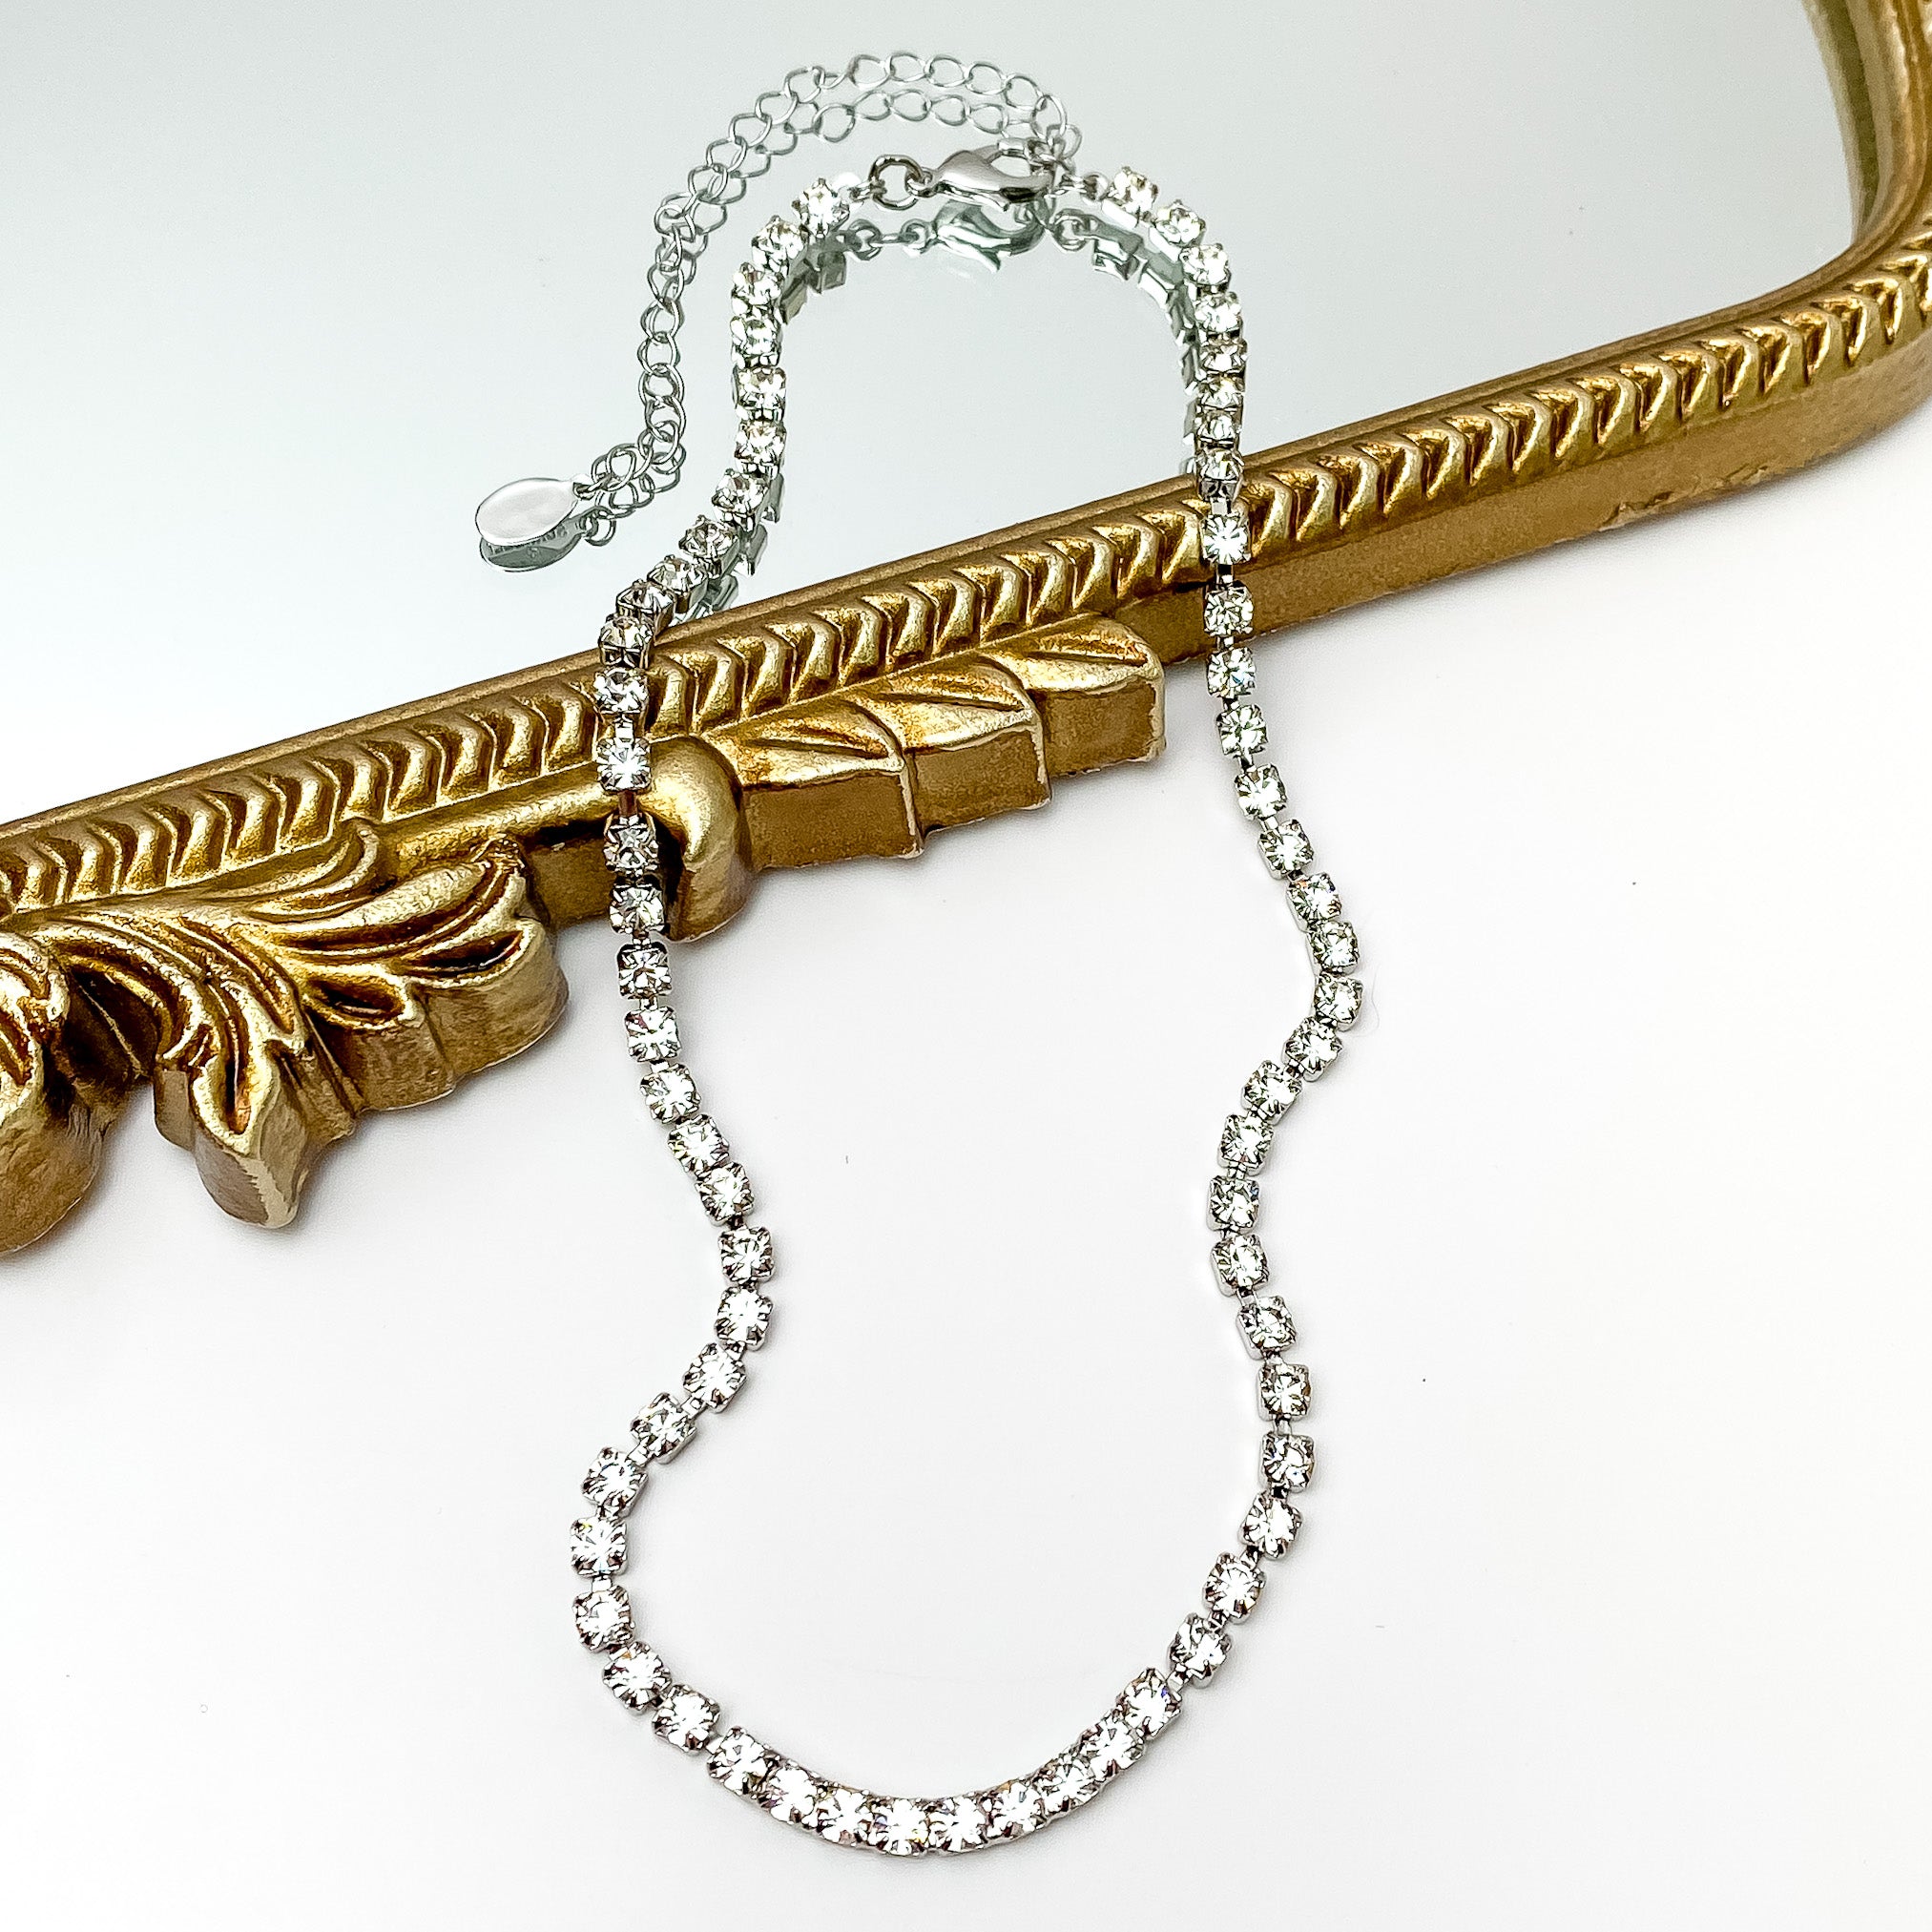 Pictured is a silver necklace with clear crystals. This necklace is pictured partially on a gold mirror on a white background. 